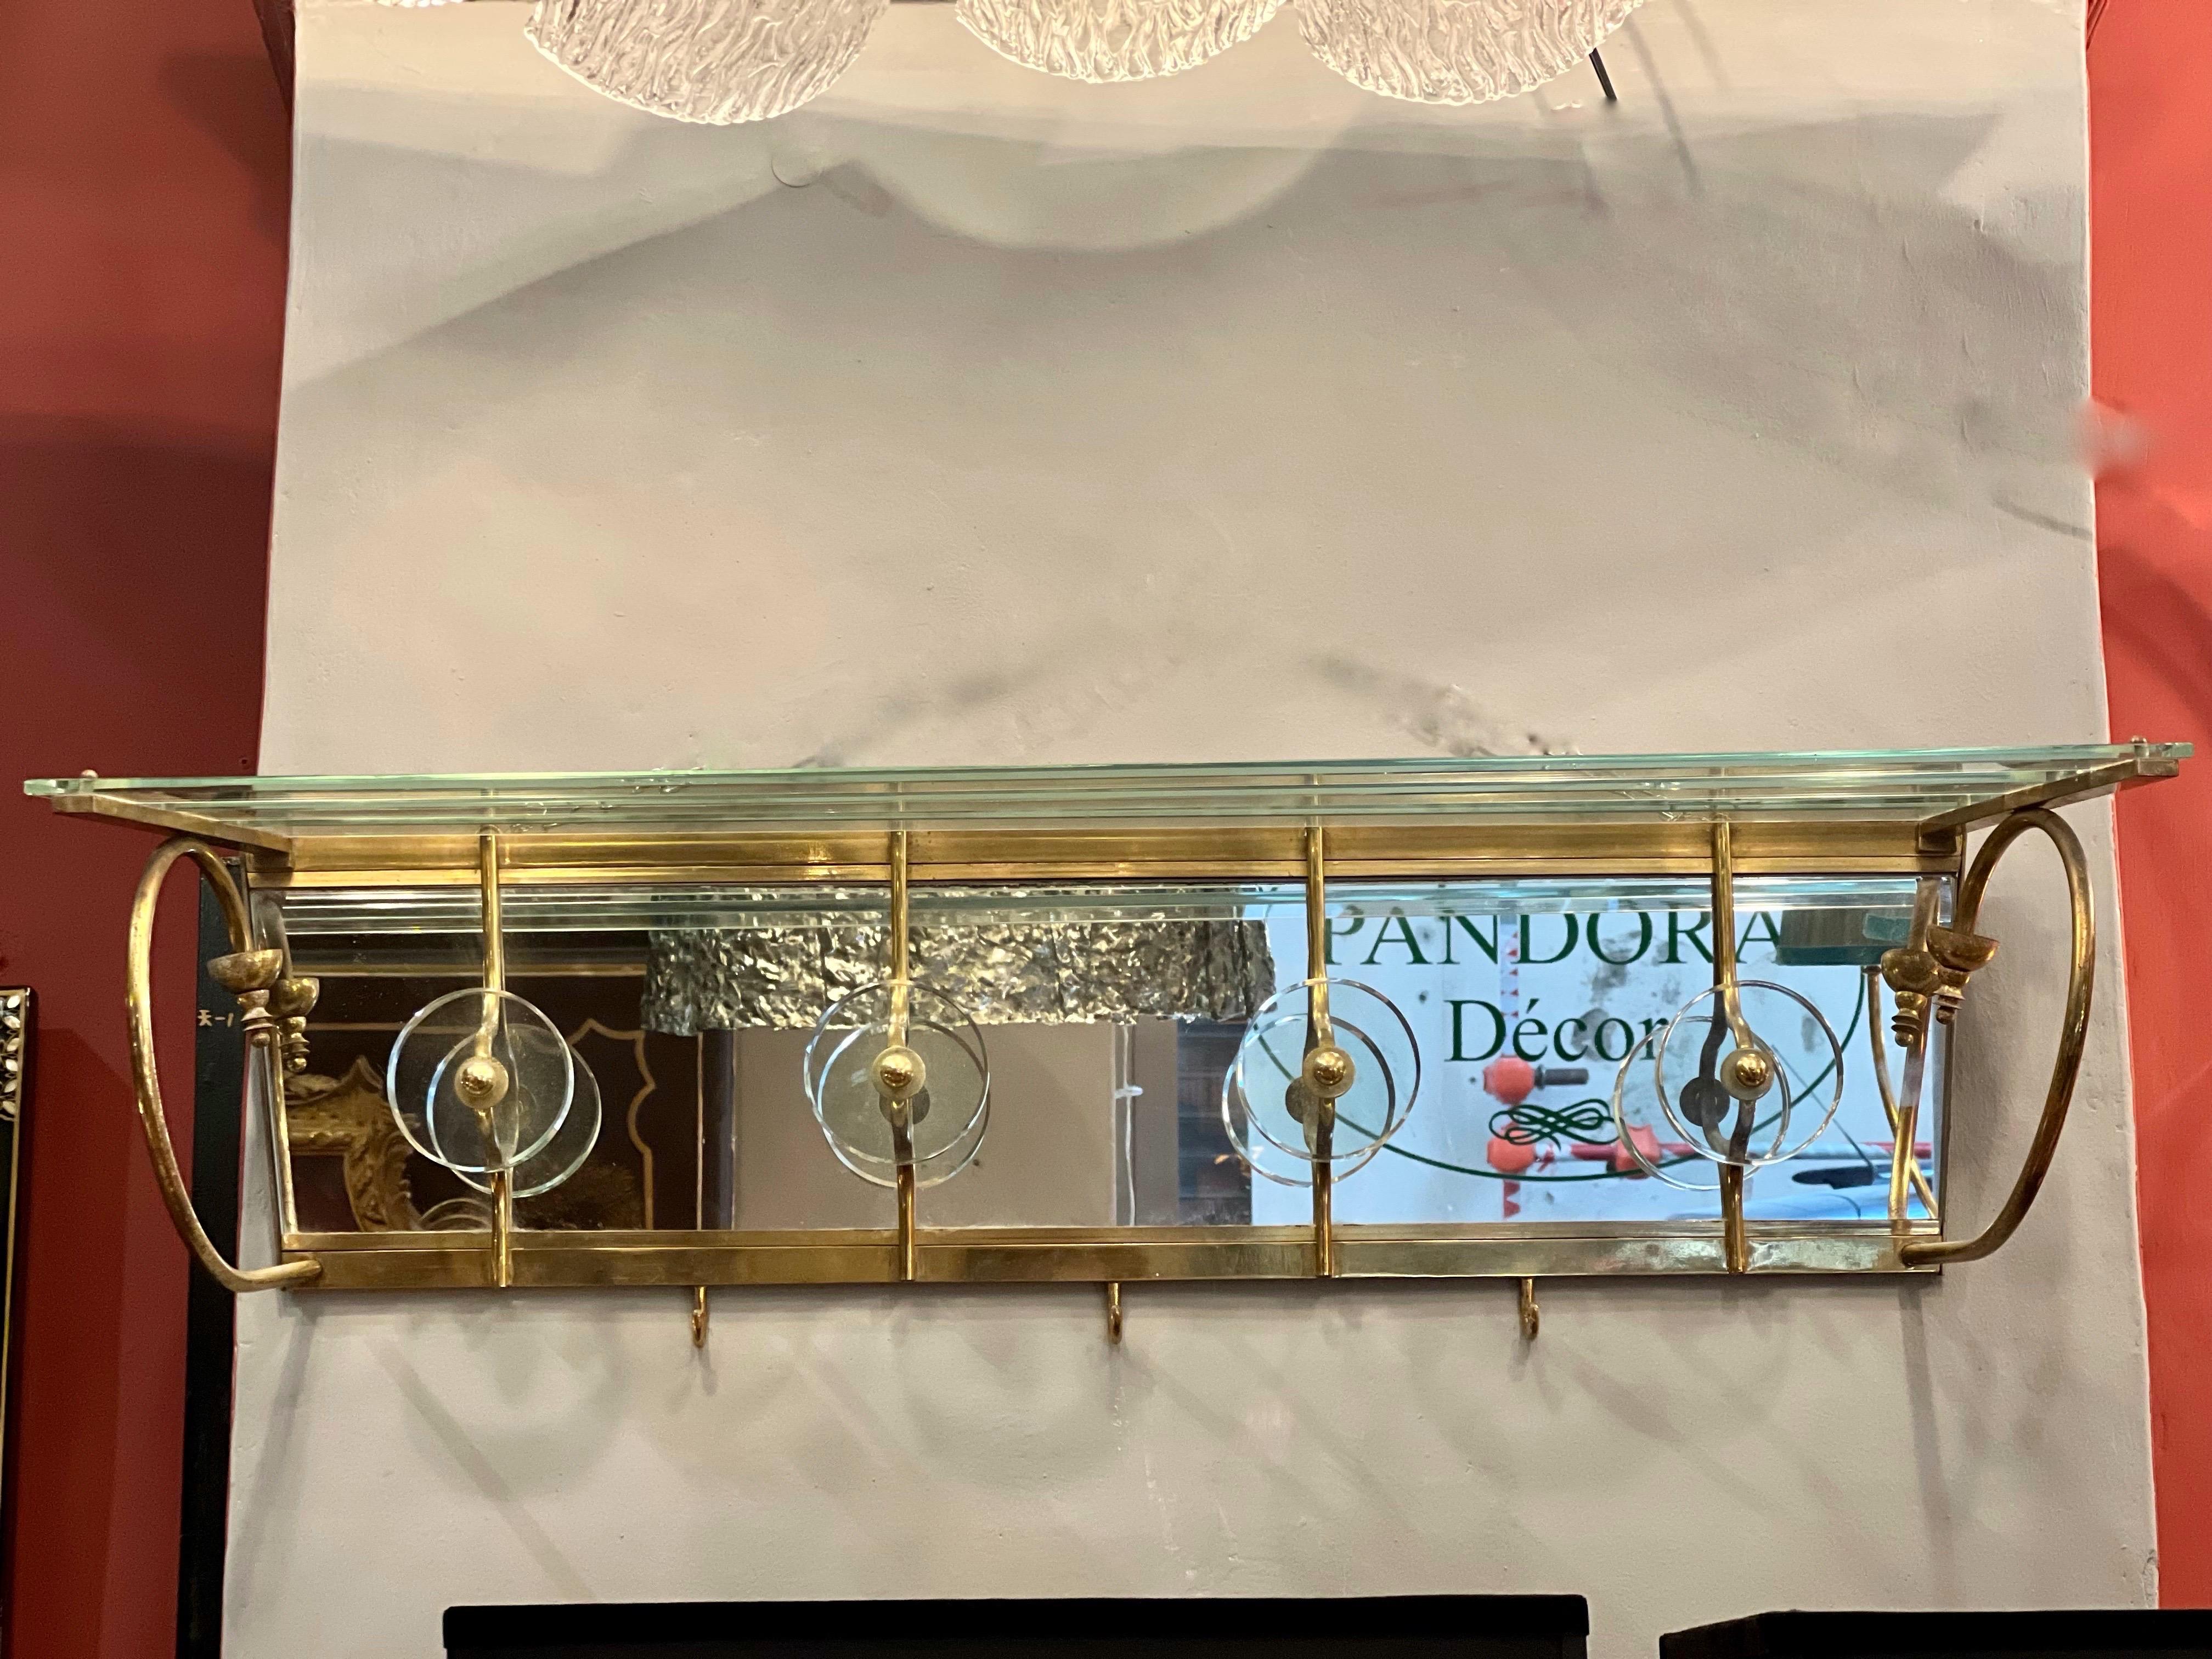 Vintage crystal and brass wall coat racks, midcentury era by Luigi Brusotti, Italy.
4 round crystal hooks and 3 brass hooks.
Very heigh decorative object.
Perfect vintage condition.

